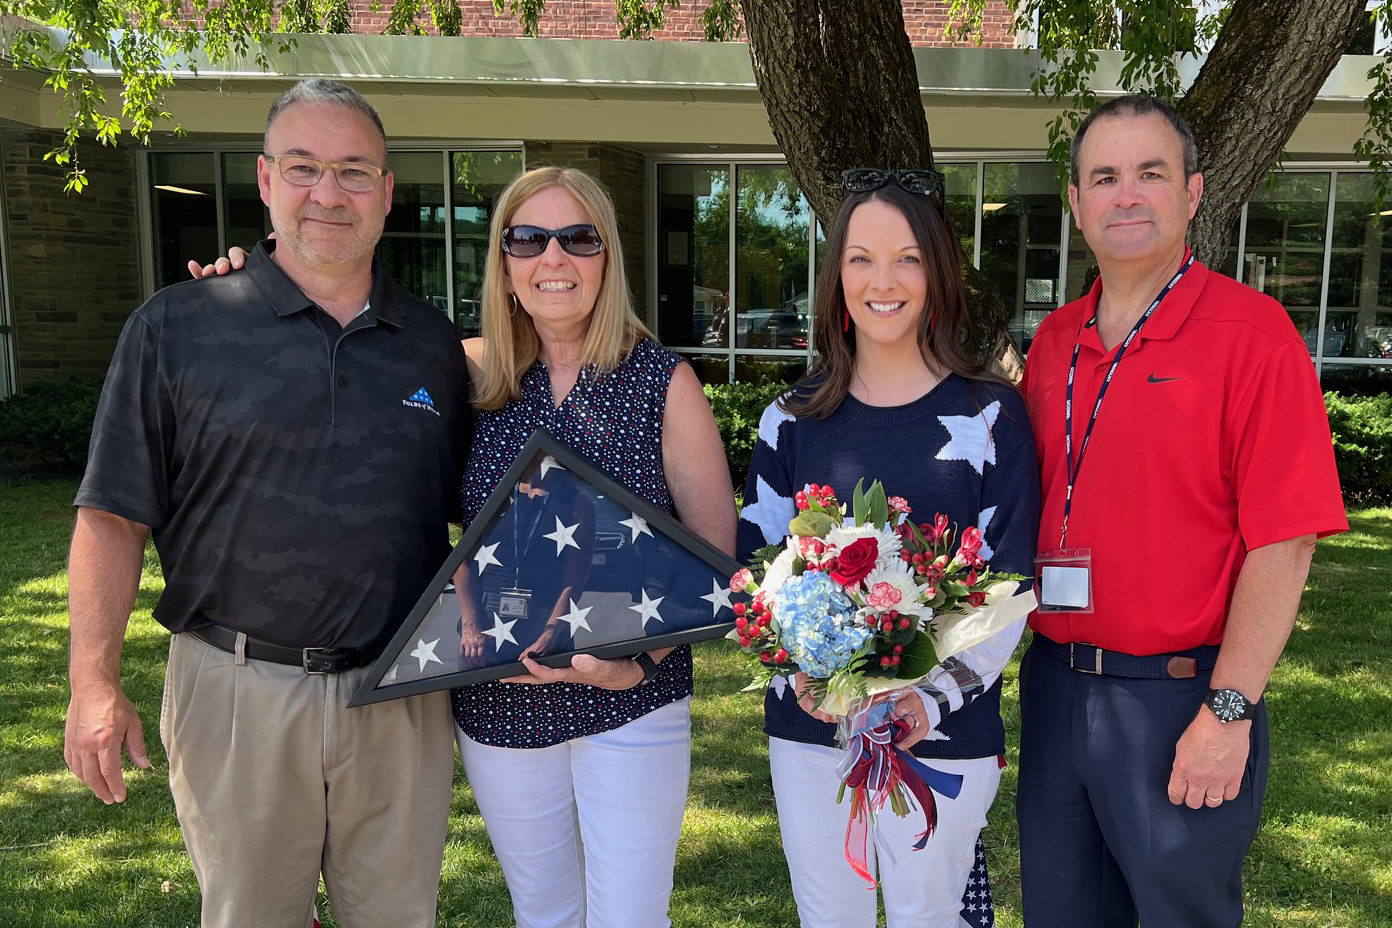 Green Meadow Secretary Joanne Nolette, who is retiring at the end of this school year, was recognized at a Flag Day ceremony on Thursday and presented with the American flag that had been flown at Green Meadow Elementary School.